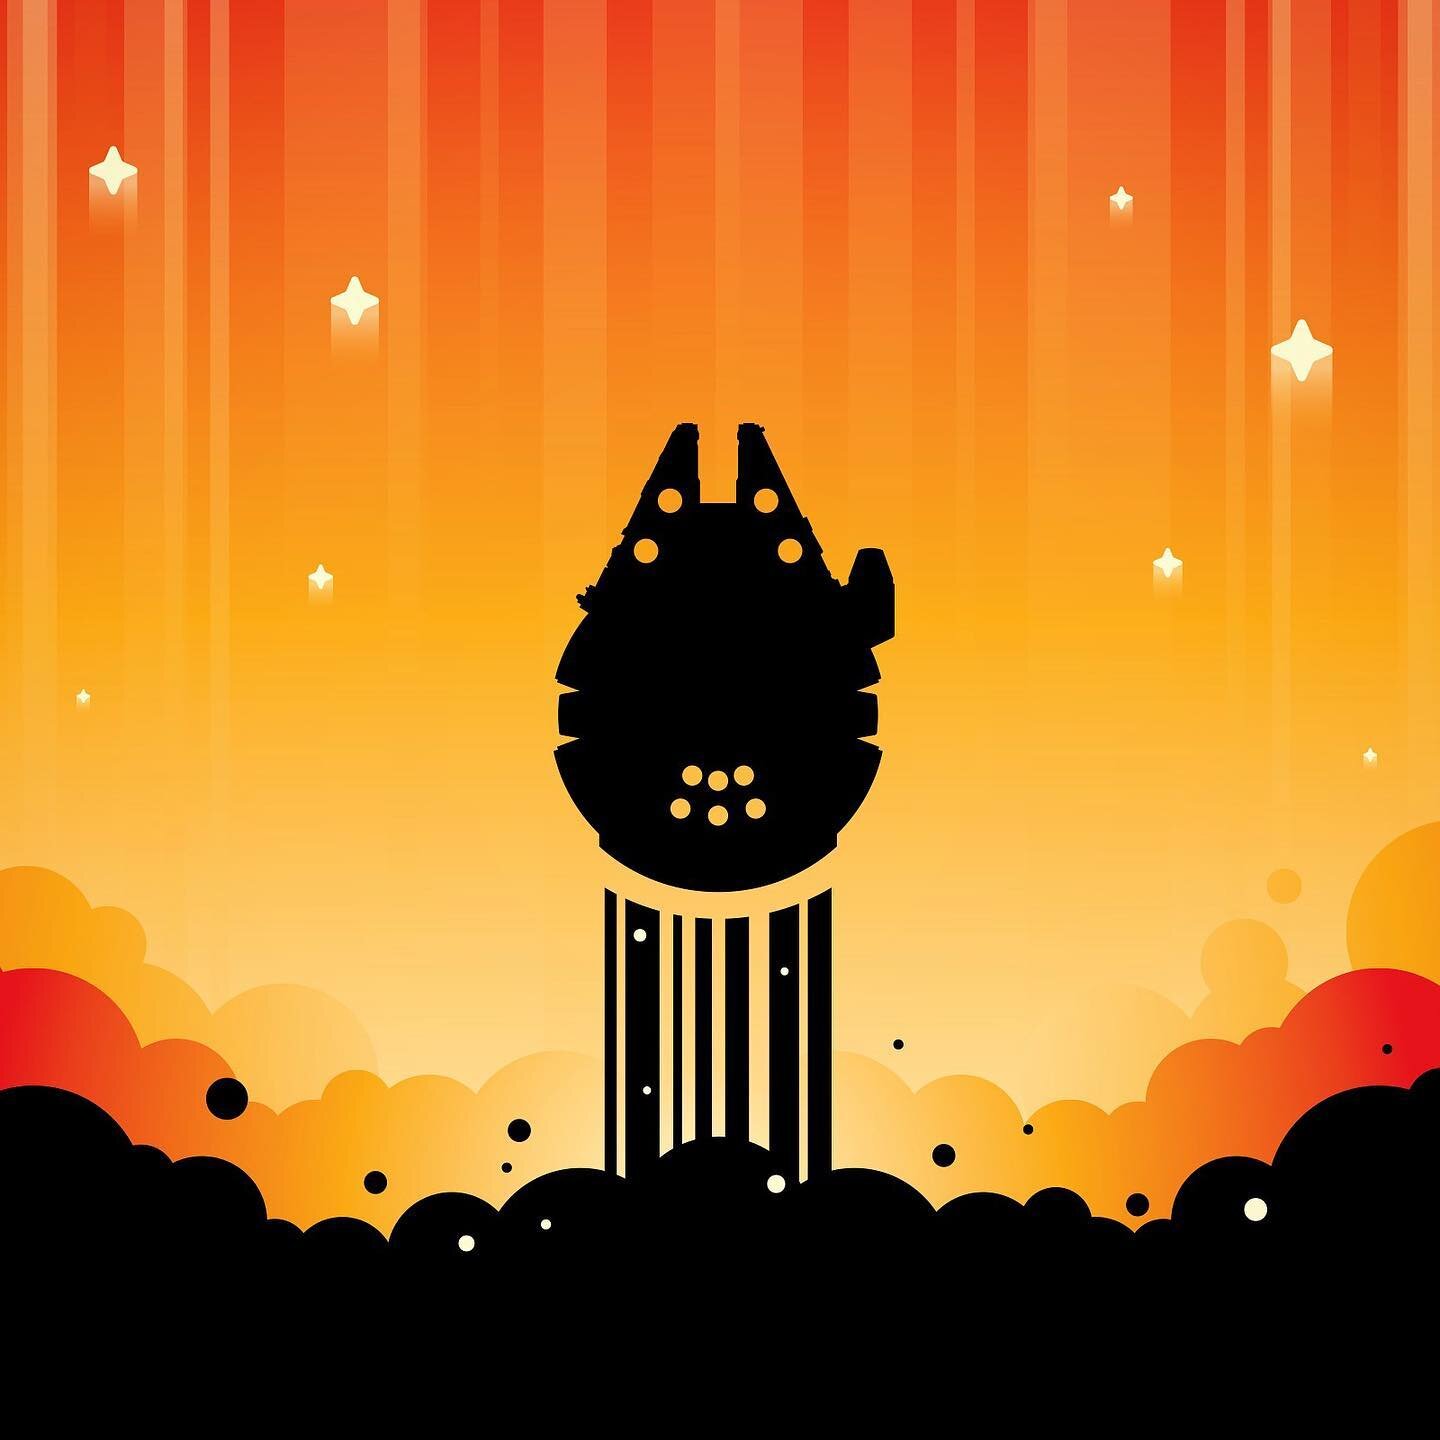 May the 4th be with you! #starwars #maytheforcebewithyou #millenniumfalcon #bespin #cloudcity #lessthan12parsecs